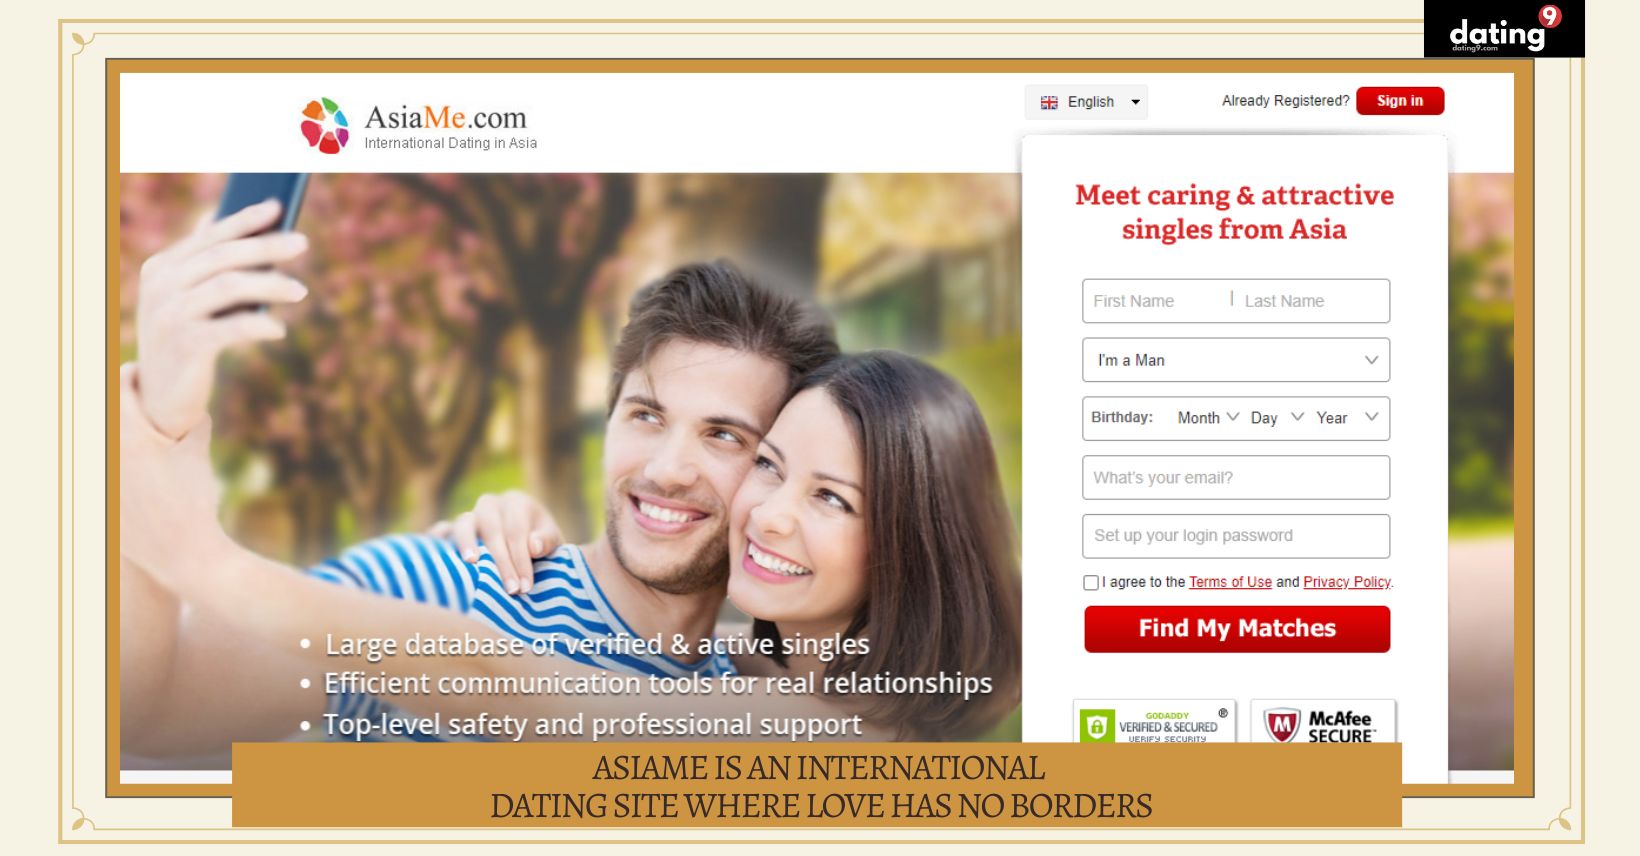 AsiaMe is an International Dating Site Where Love Has No Borders